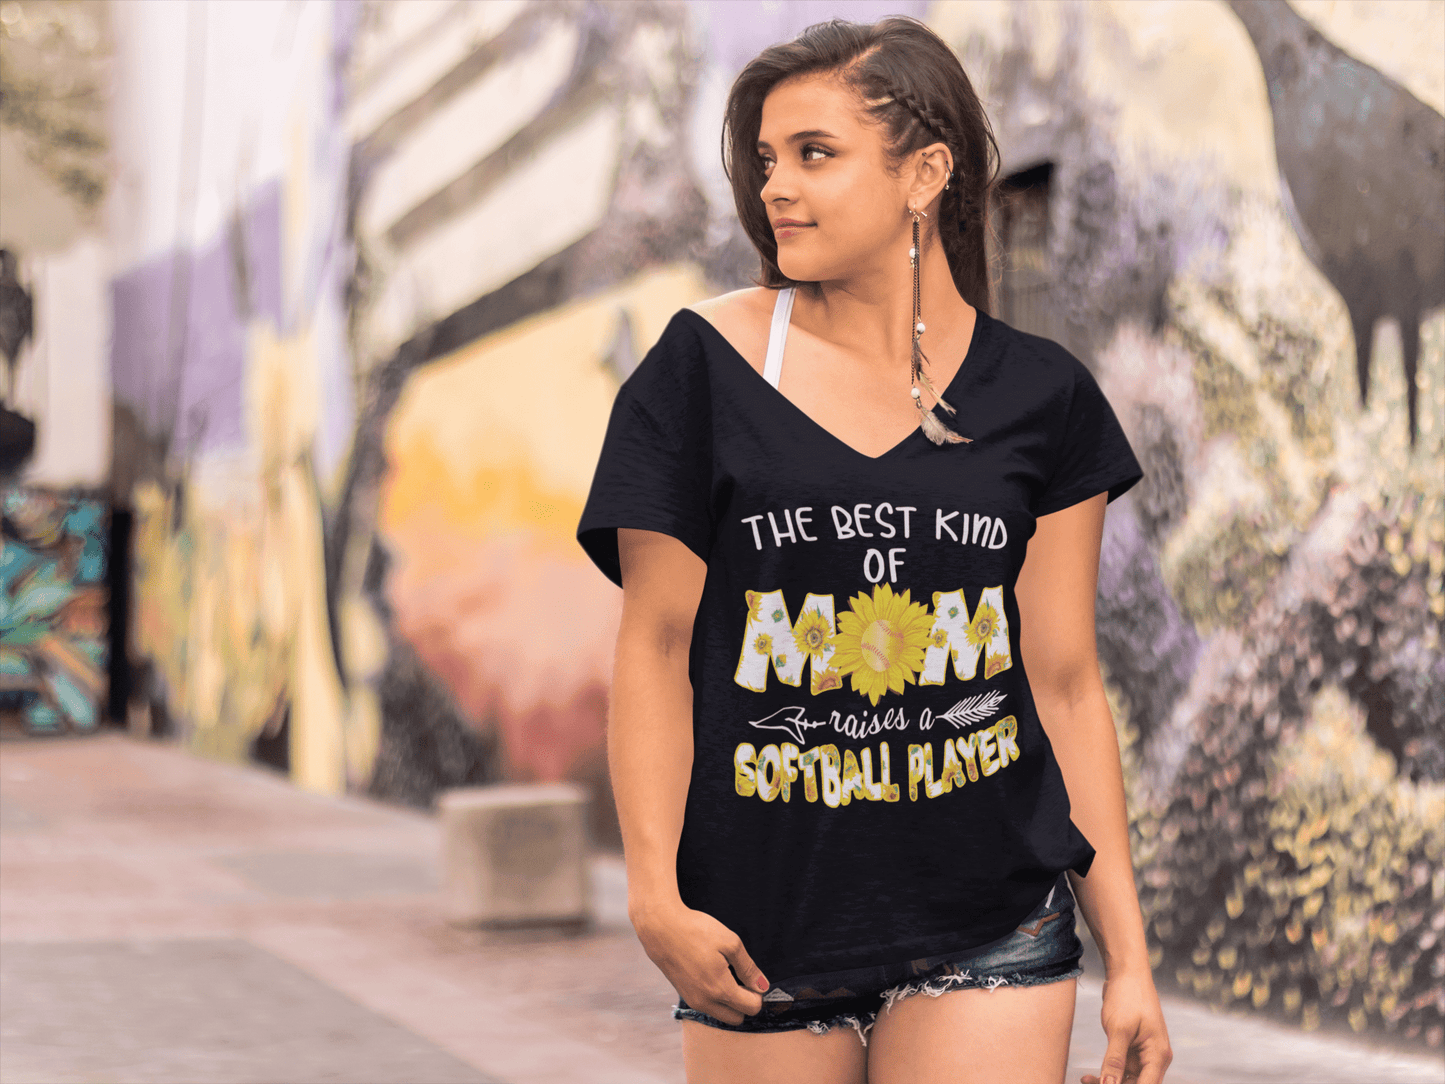 ULTRABASIC Women's V-Neck T-Shirt The Best Kind of Mom Raises a Softball Player - Funny Mom's Quote